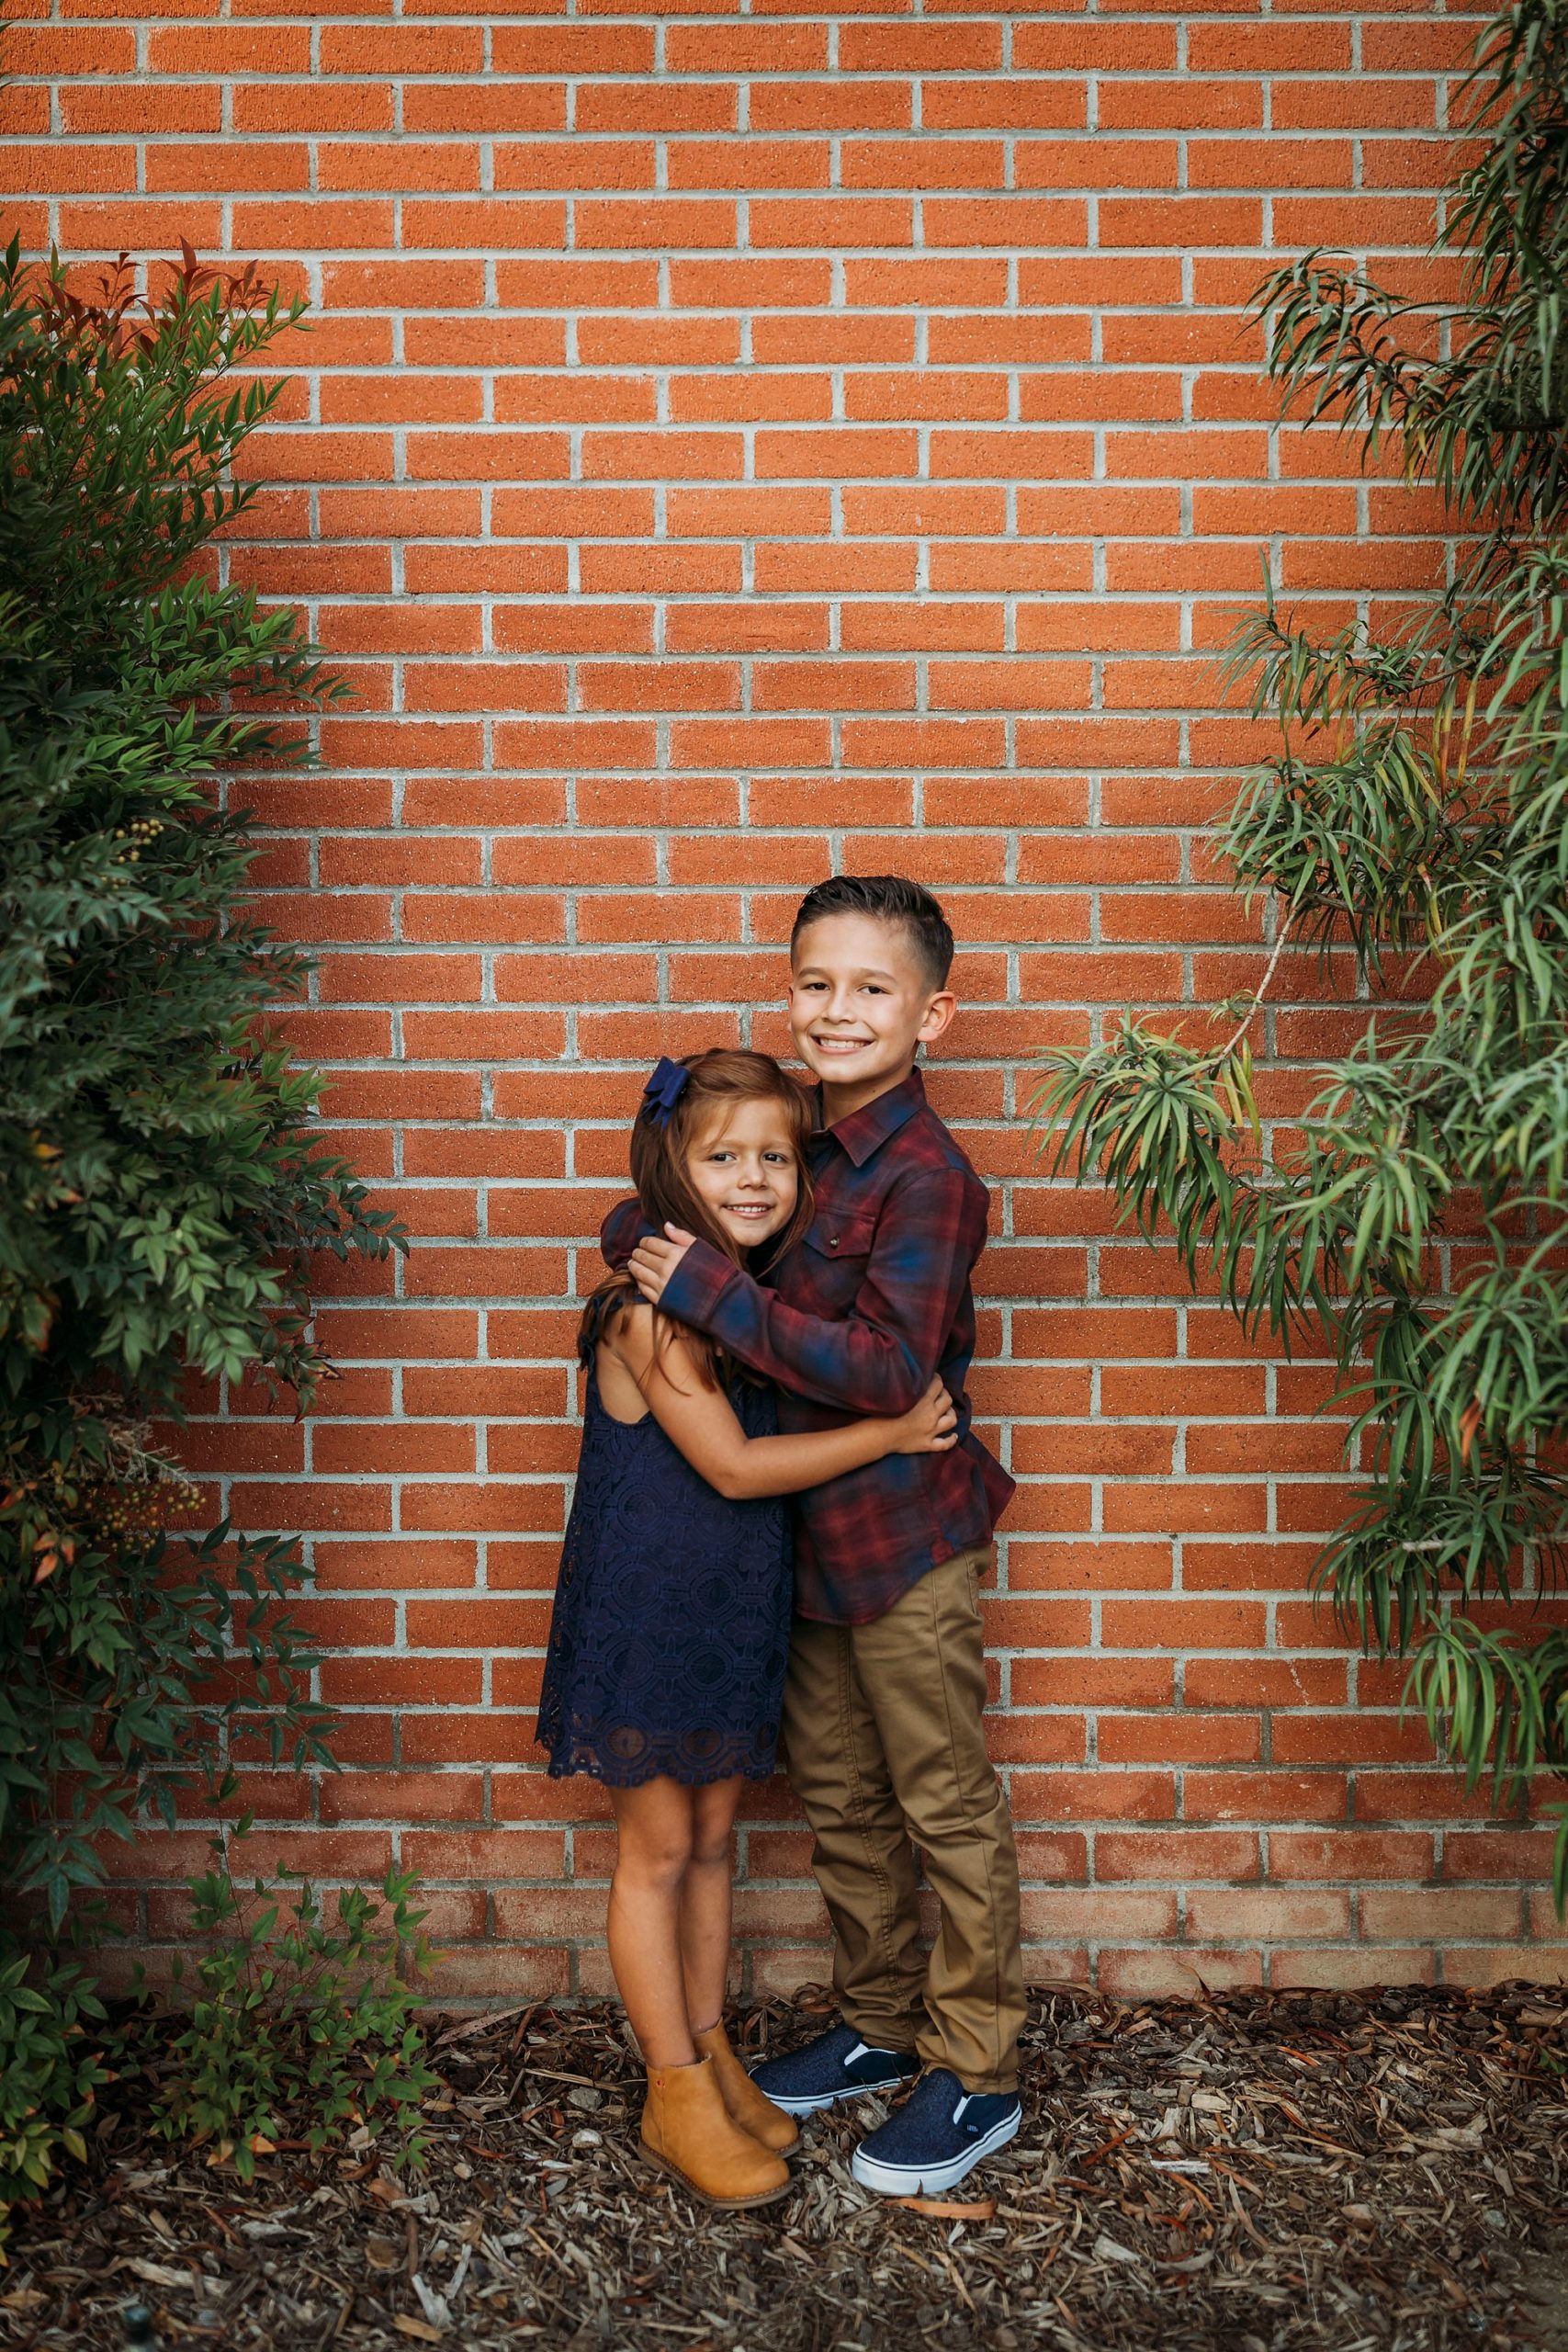 Thomas Family Francesca Marchese Photography Long Beach Orange County family photographer siblings brick wall background